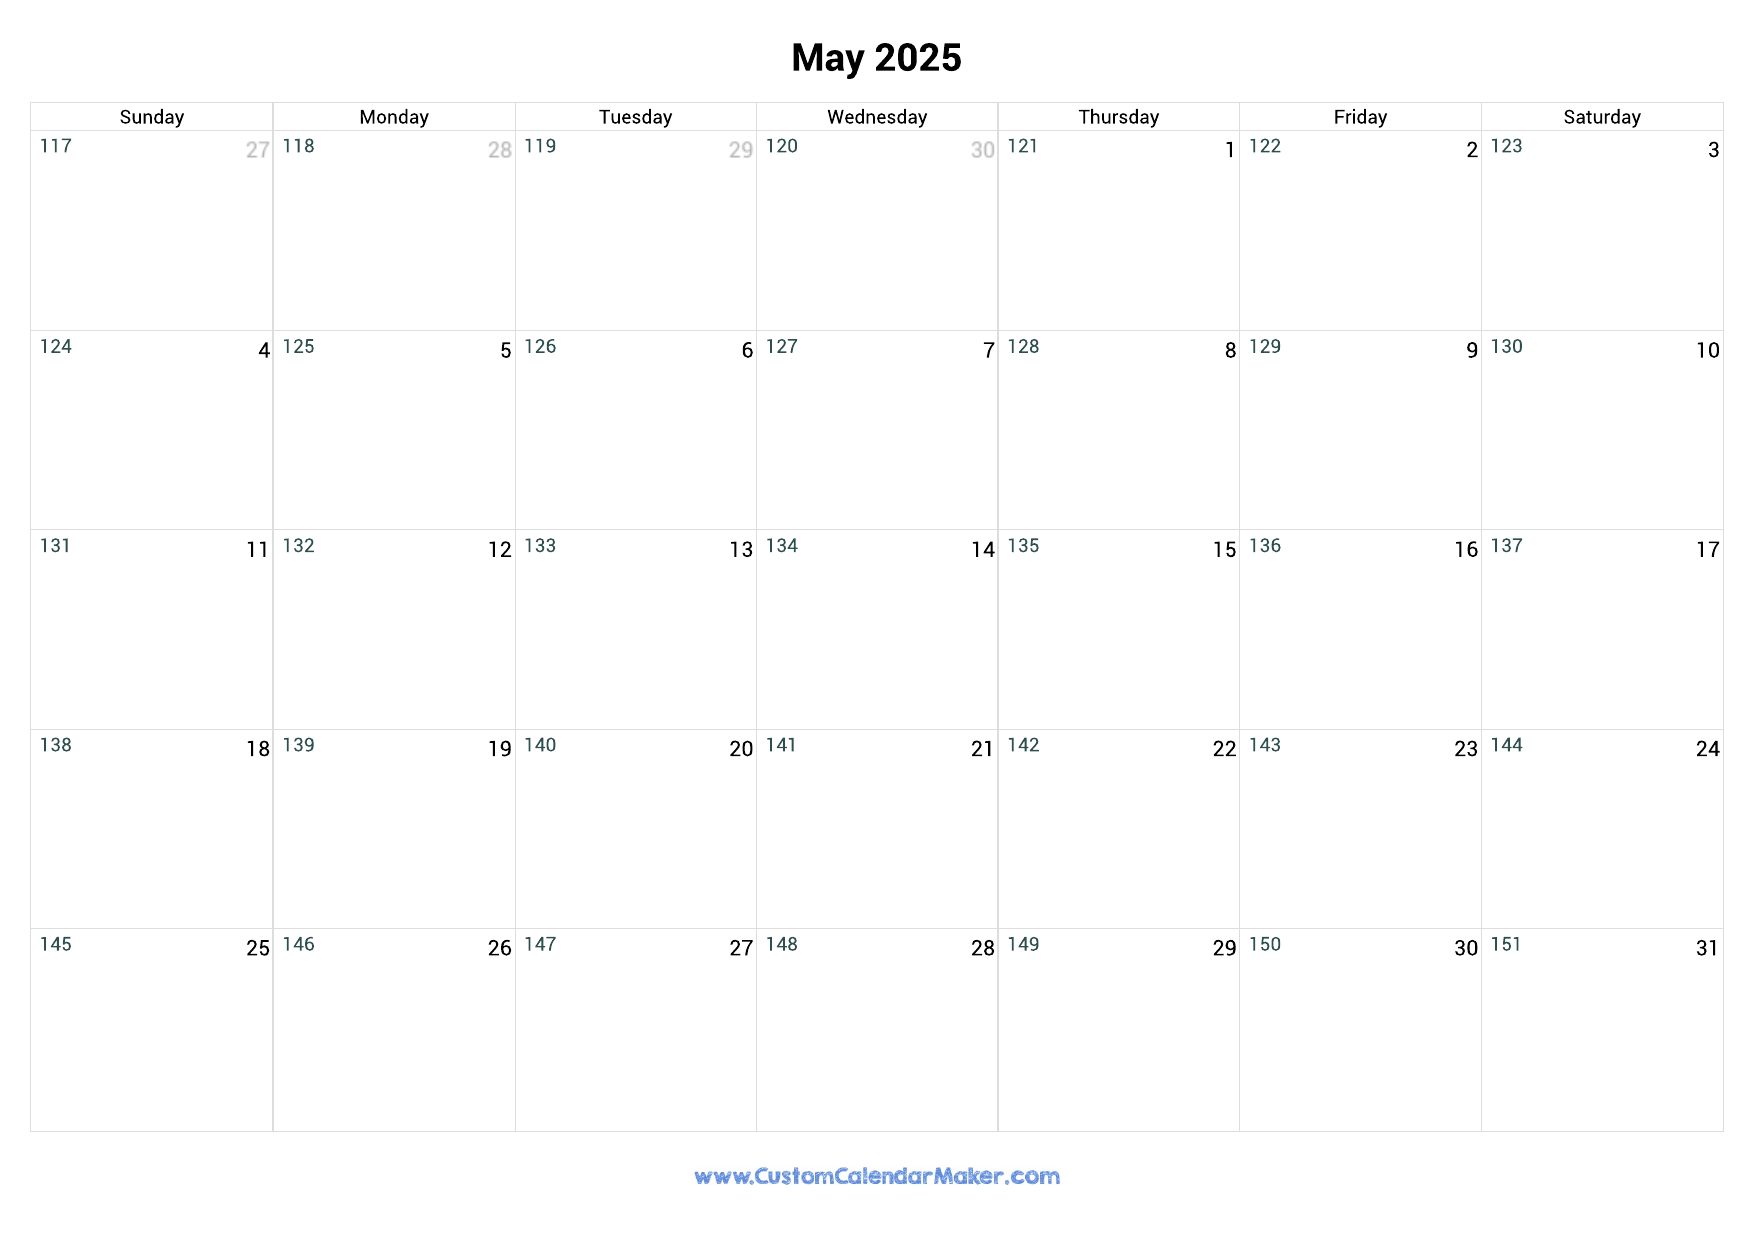 may-2025-day-number-of-the-year-calendar